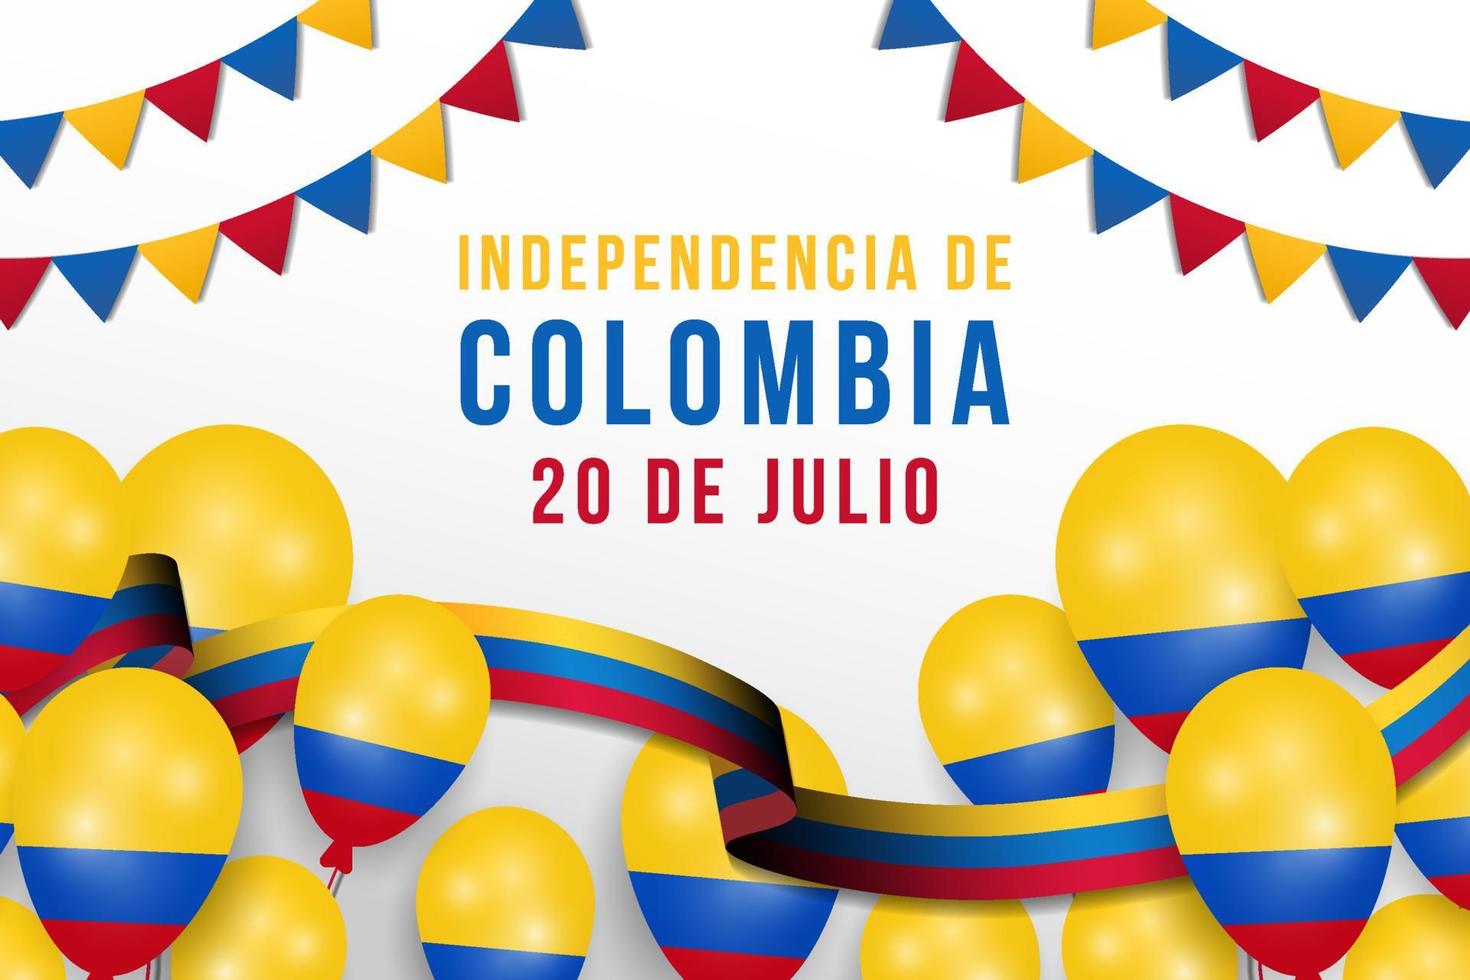 20 de julio colombia independence day background with colombian flag and balloon vector